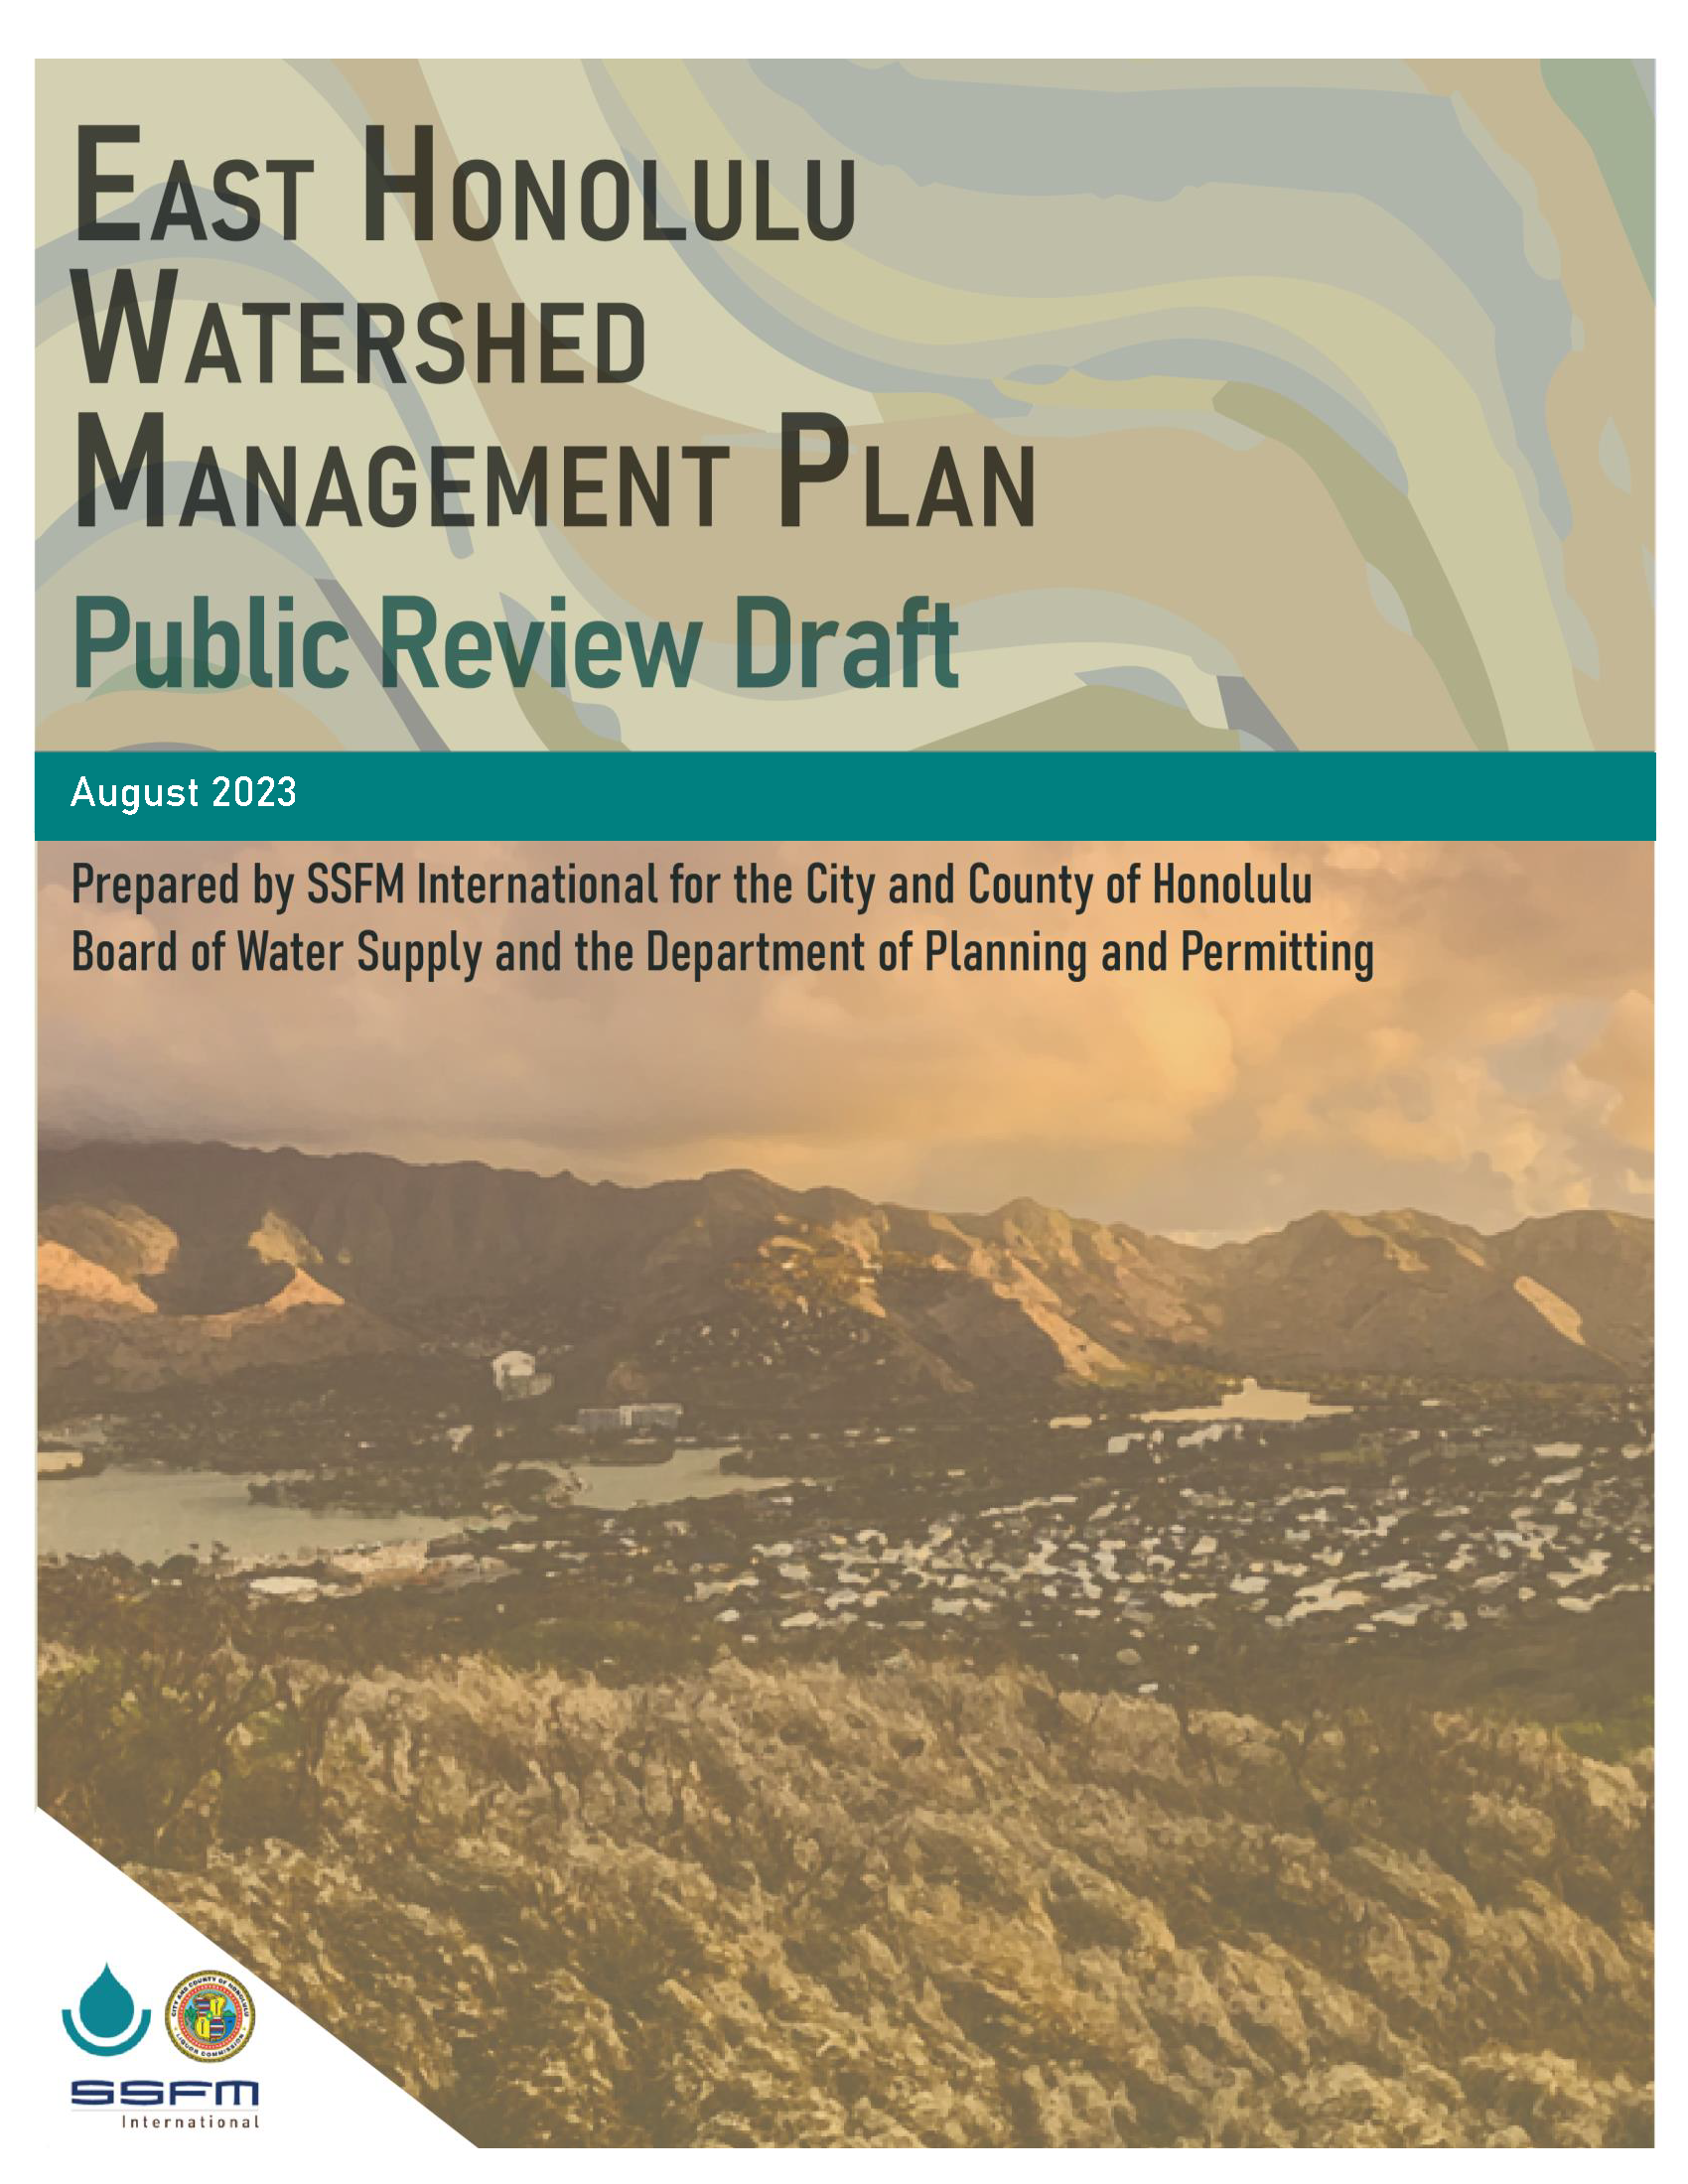 East Honolulu Watershed Management Plan Public Review Draft